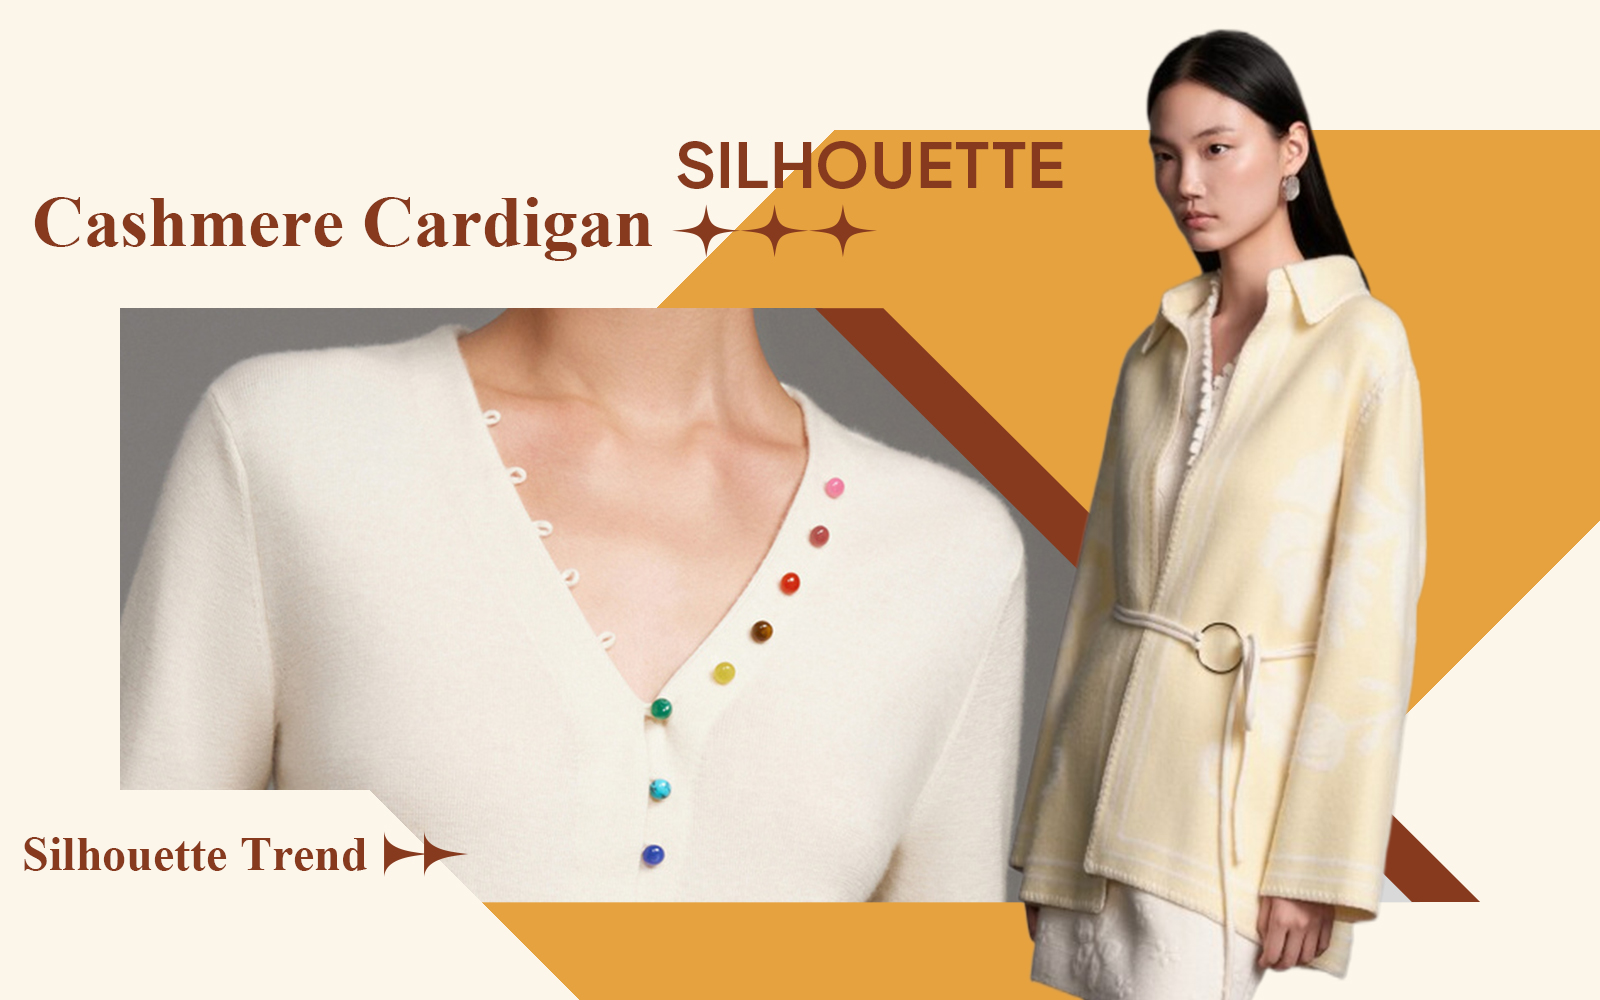 Cashmere Cardigan -- The Silhouette Trend for Womenswear